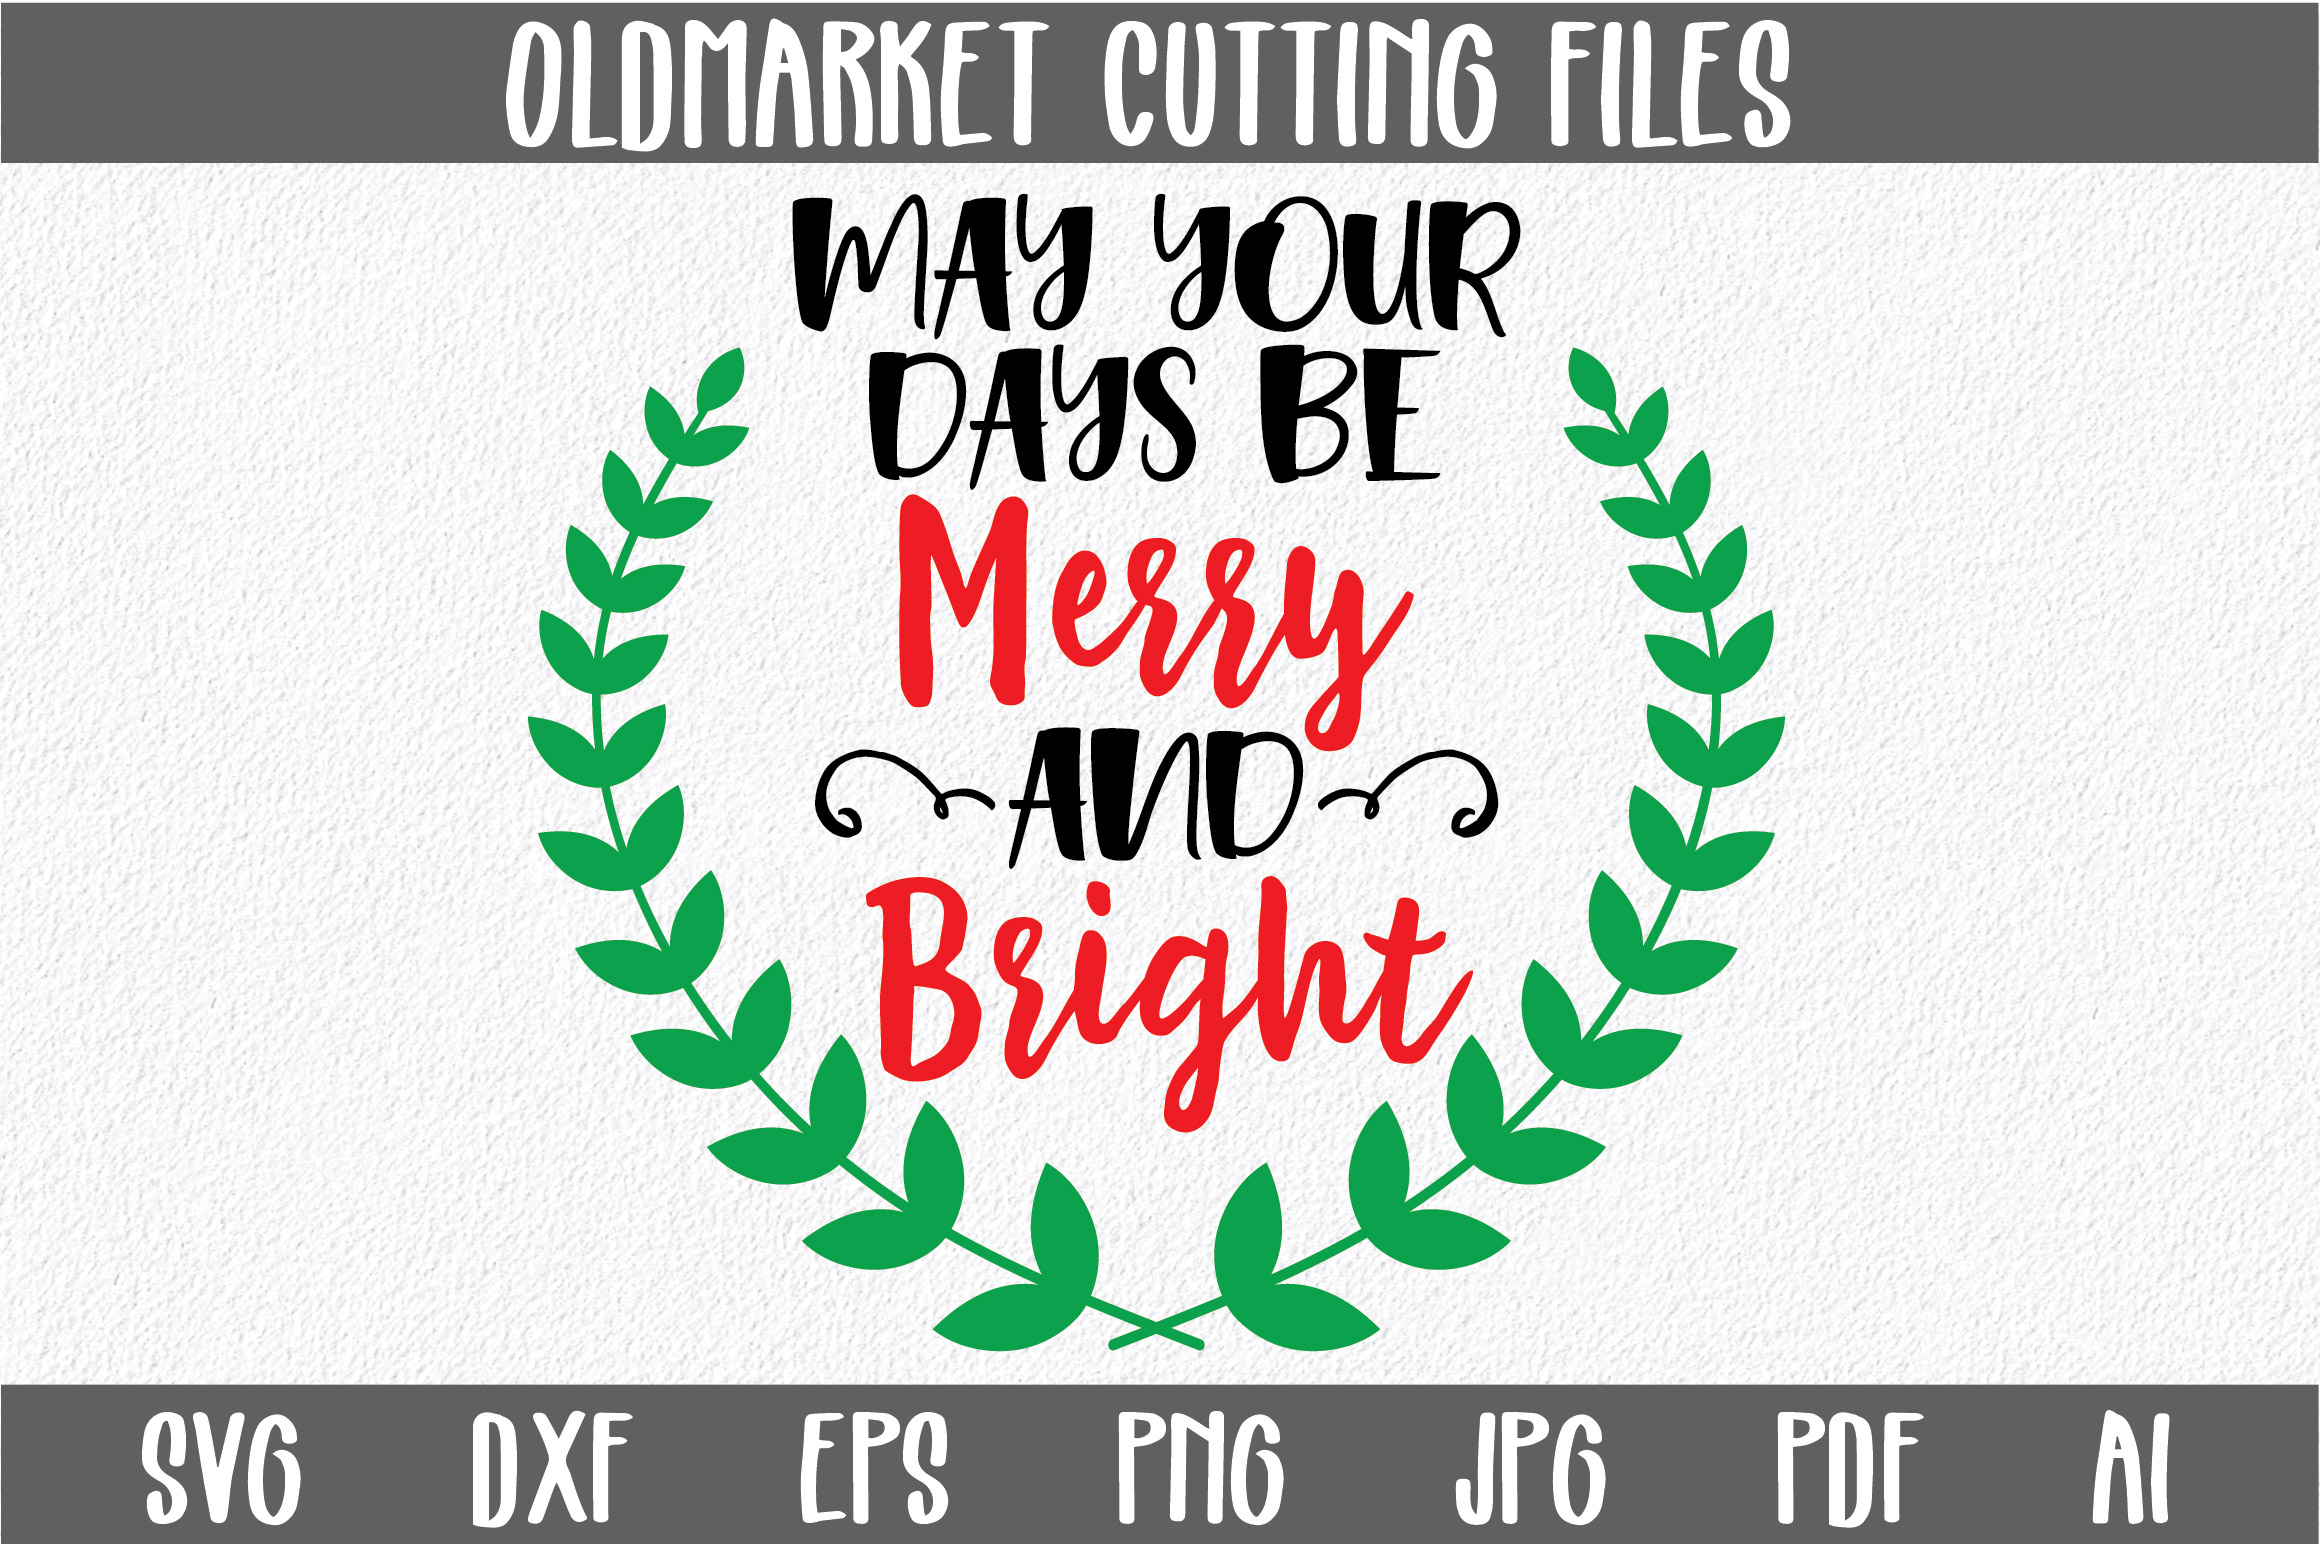 may-your-days-be-merry-and-bright-christmas-svg-cut-file-136311